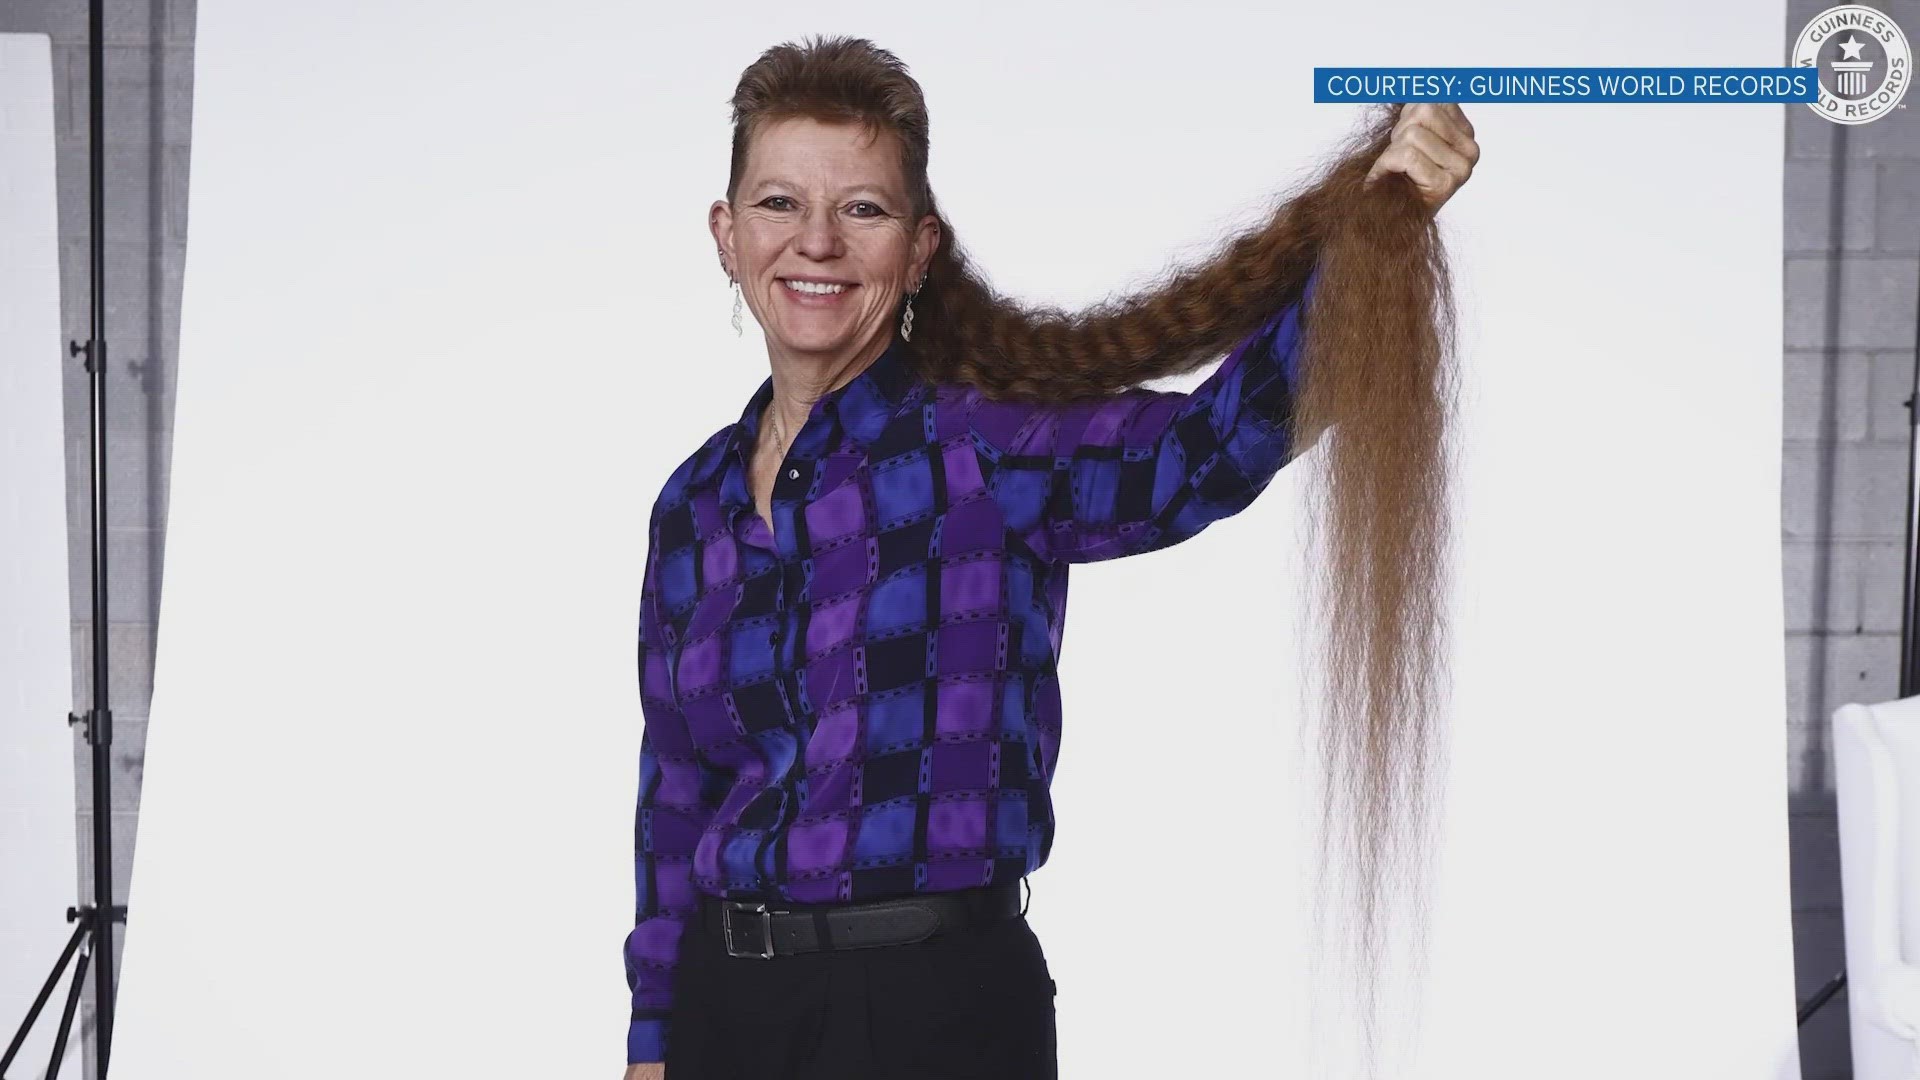 Tami Manis said she's been growing her hair since February 1990.